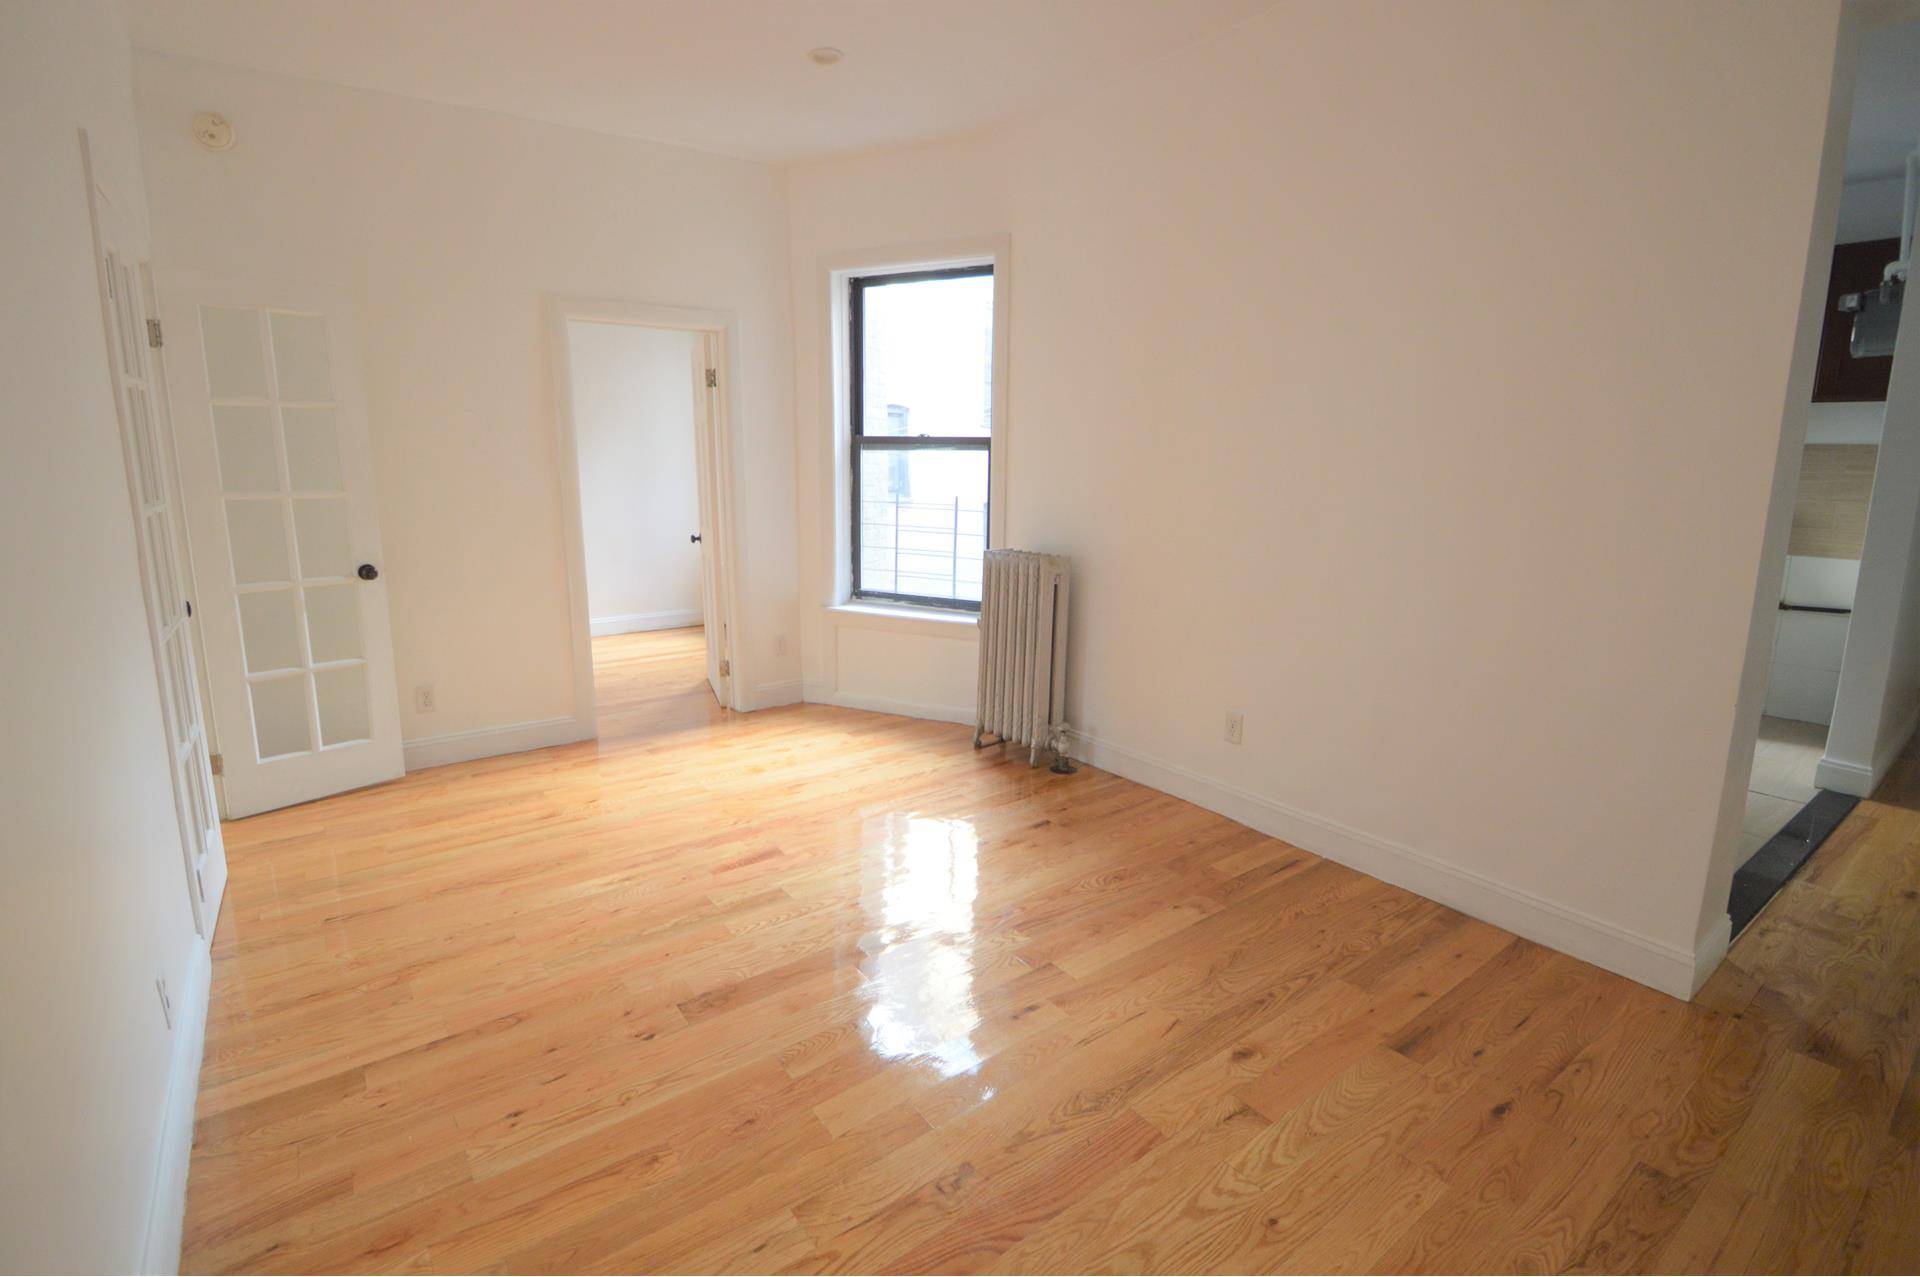 NO FEE CYOF. This spacious two bedroom, one bathroom apartment is located in the Washington Heights neighborhood.